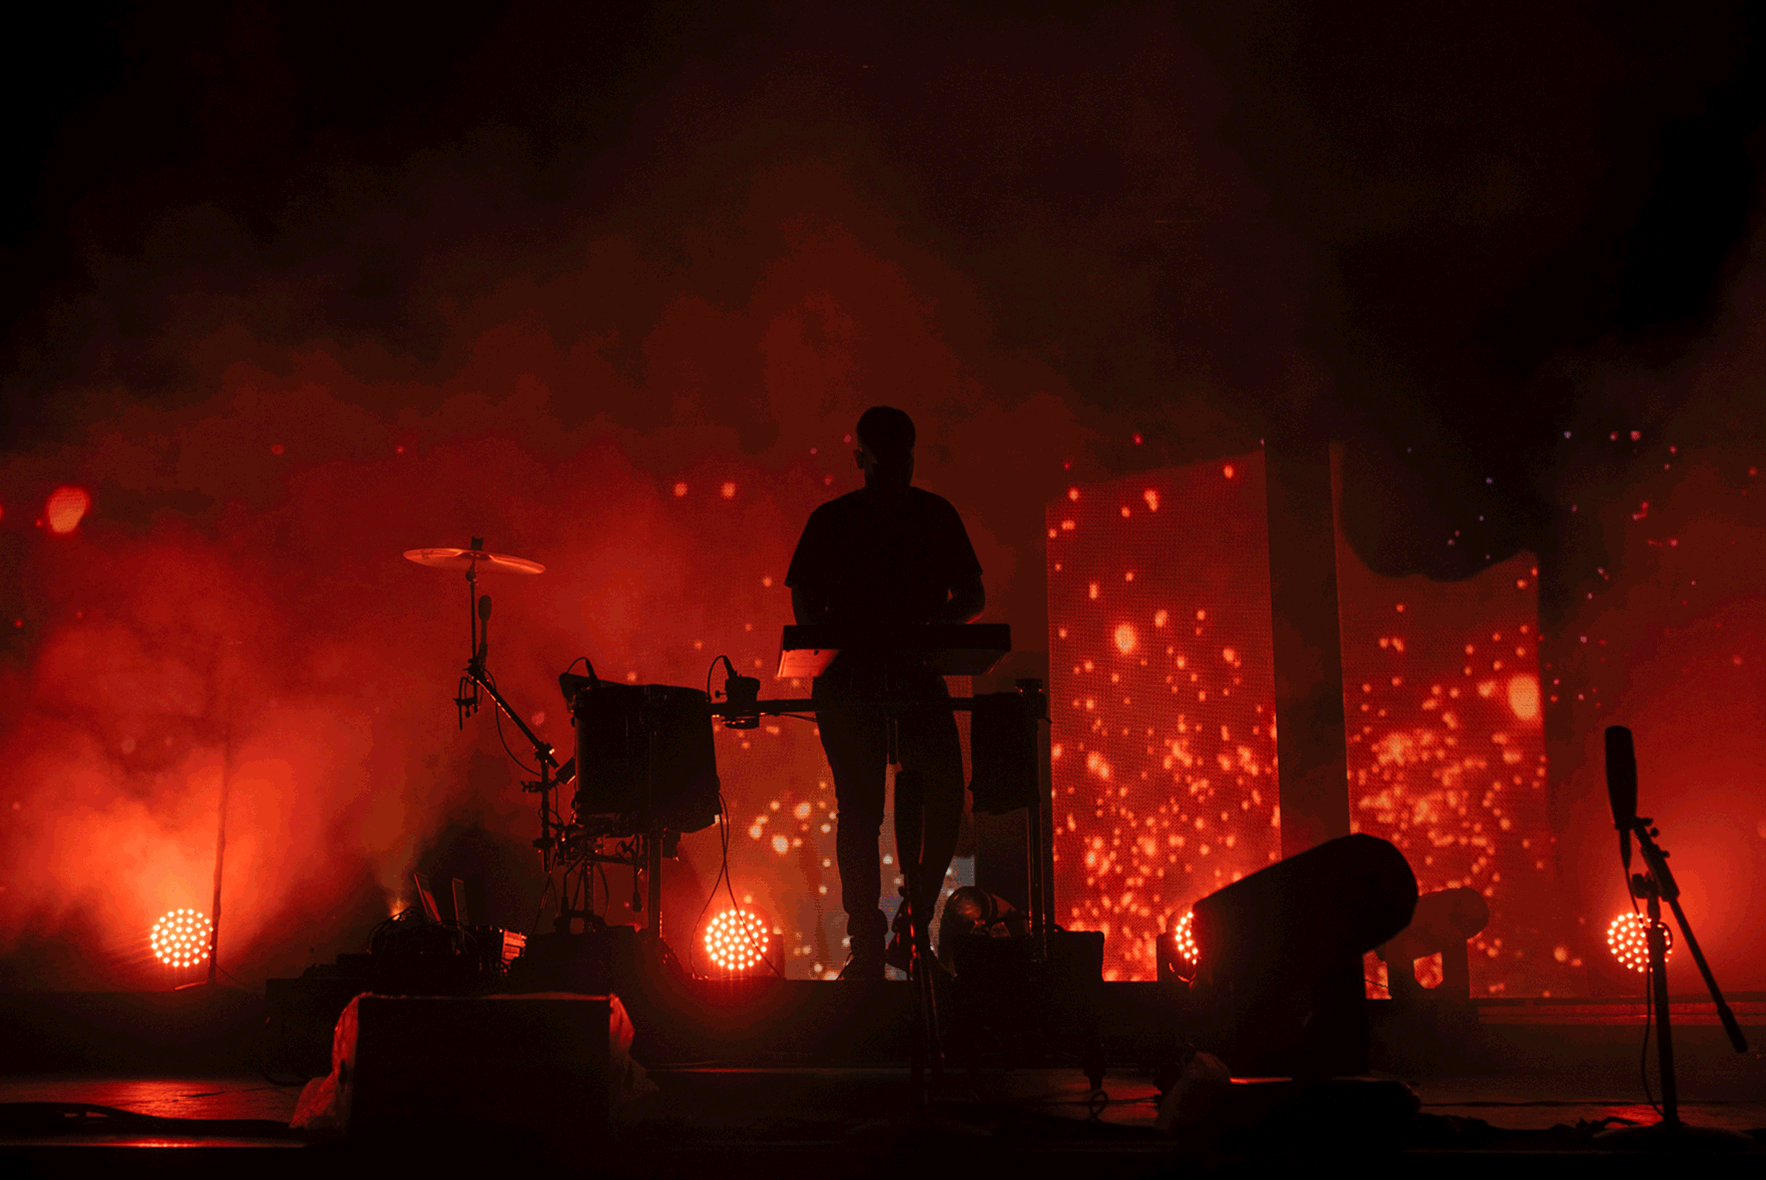 American electronic duo, Odesza, from Bellingham, Washington, perform at the Day for Night Music & Arts Festival in Houston, Texas, photographed by Todd Spoth.